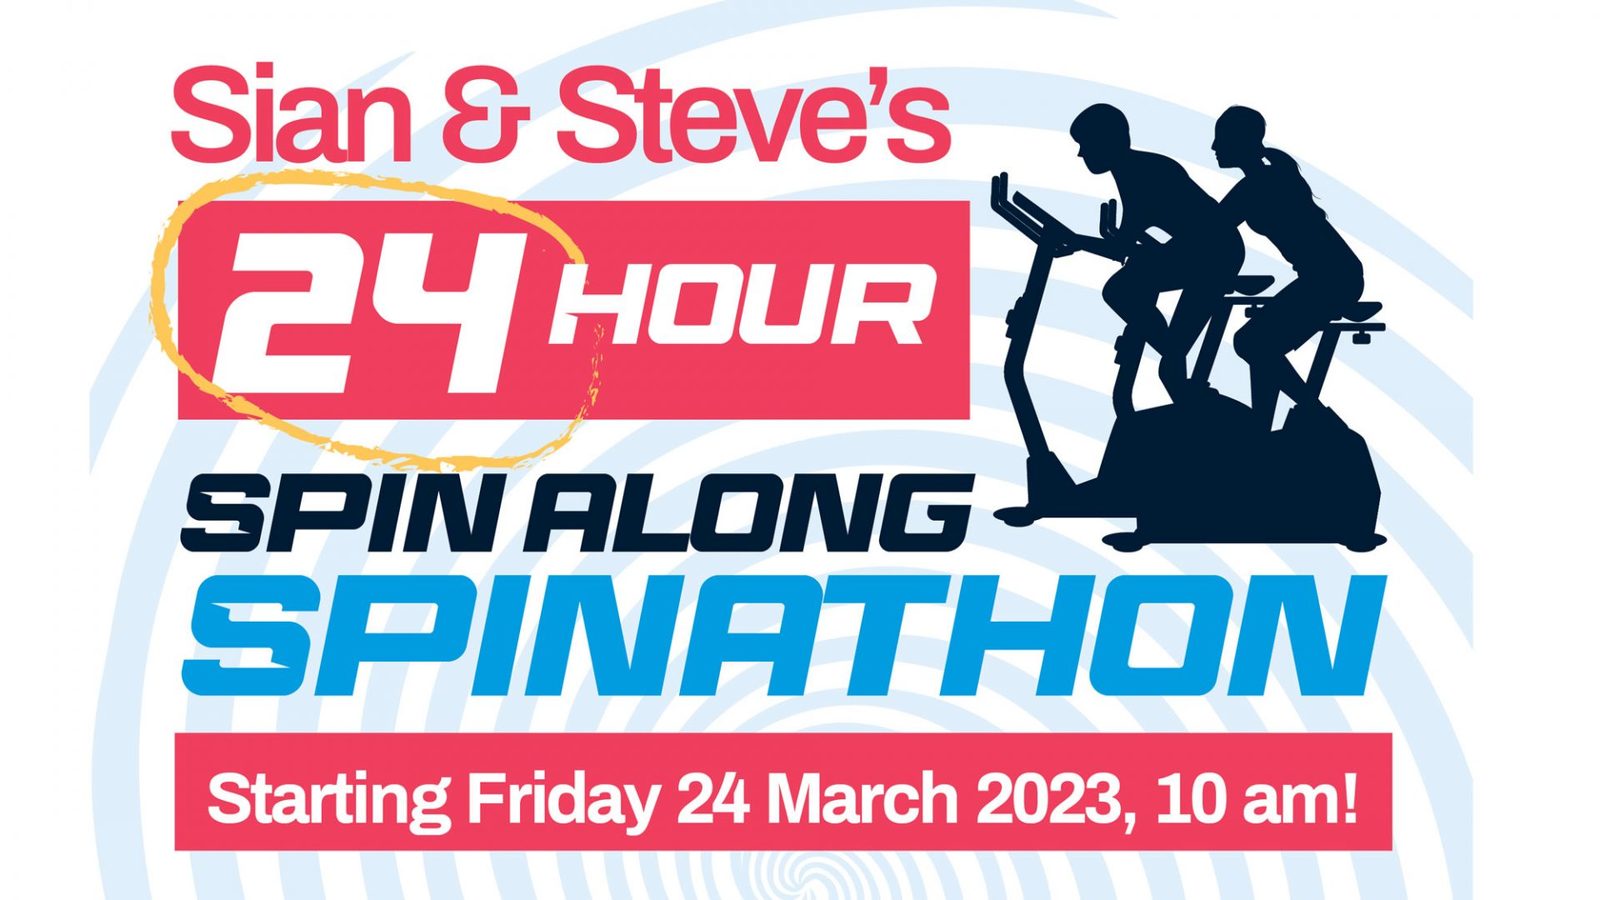 Sian & Steve's 24 hour Spinalong Spinathon